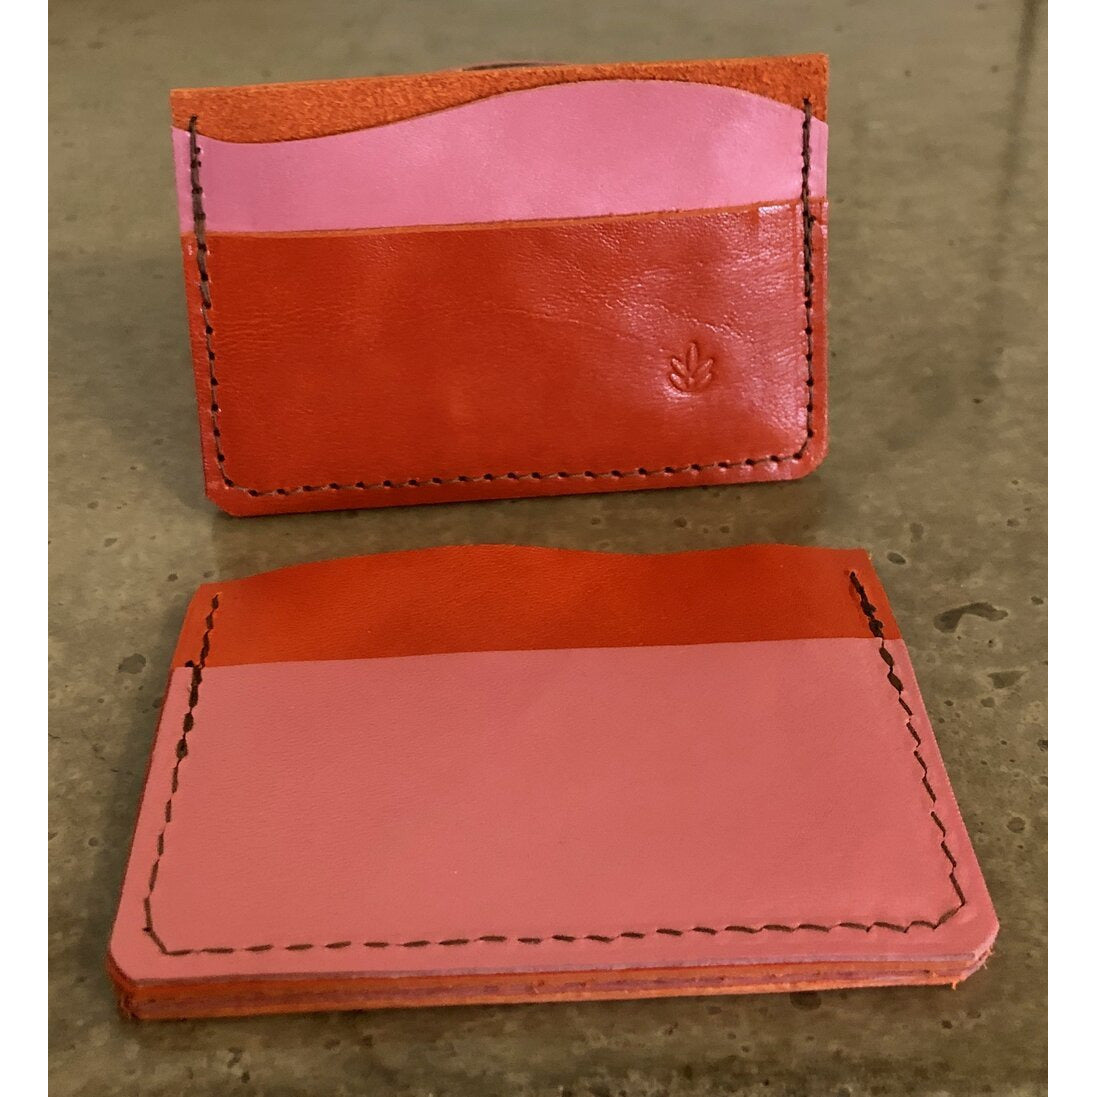 Minimalist 3 Pocket Leather Wallet in bright orange and bubblegum pink, front and back view